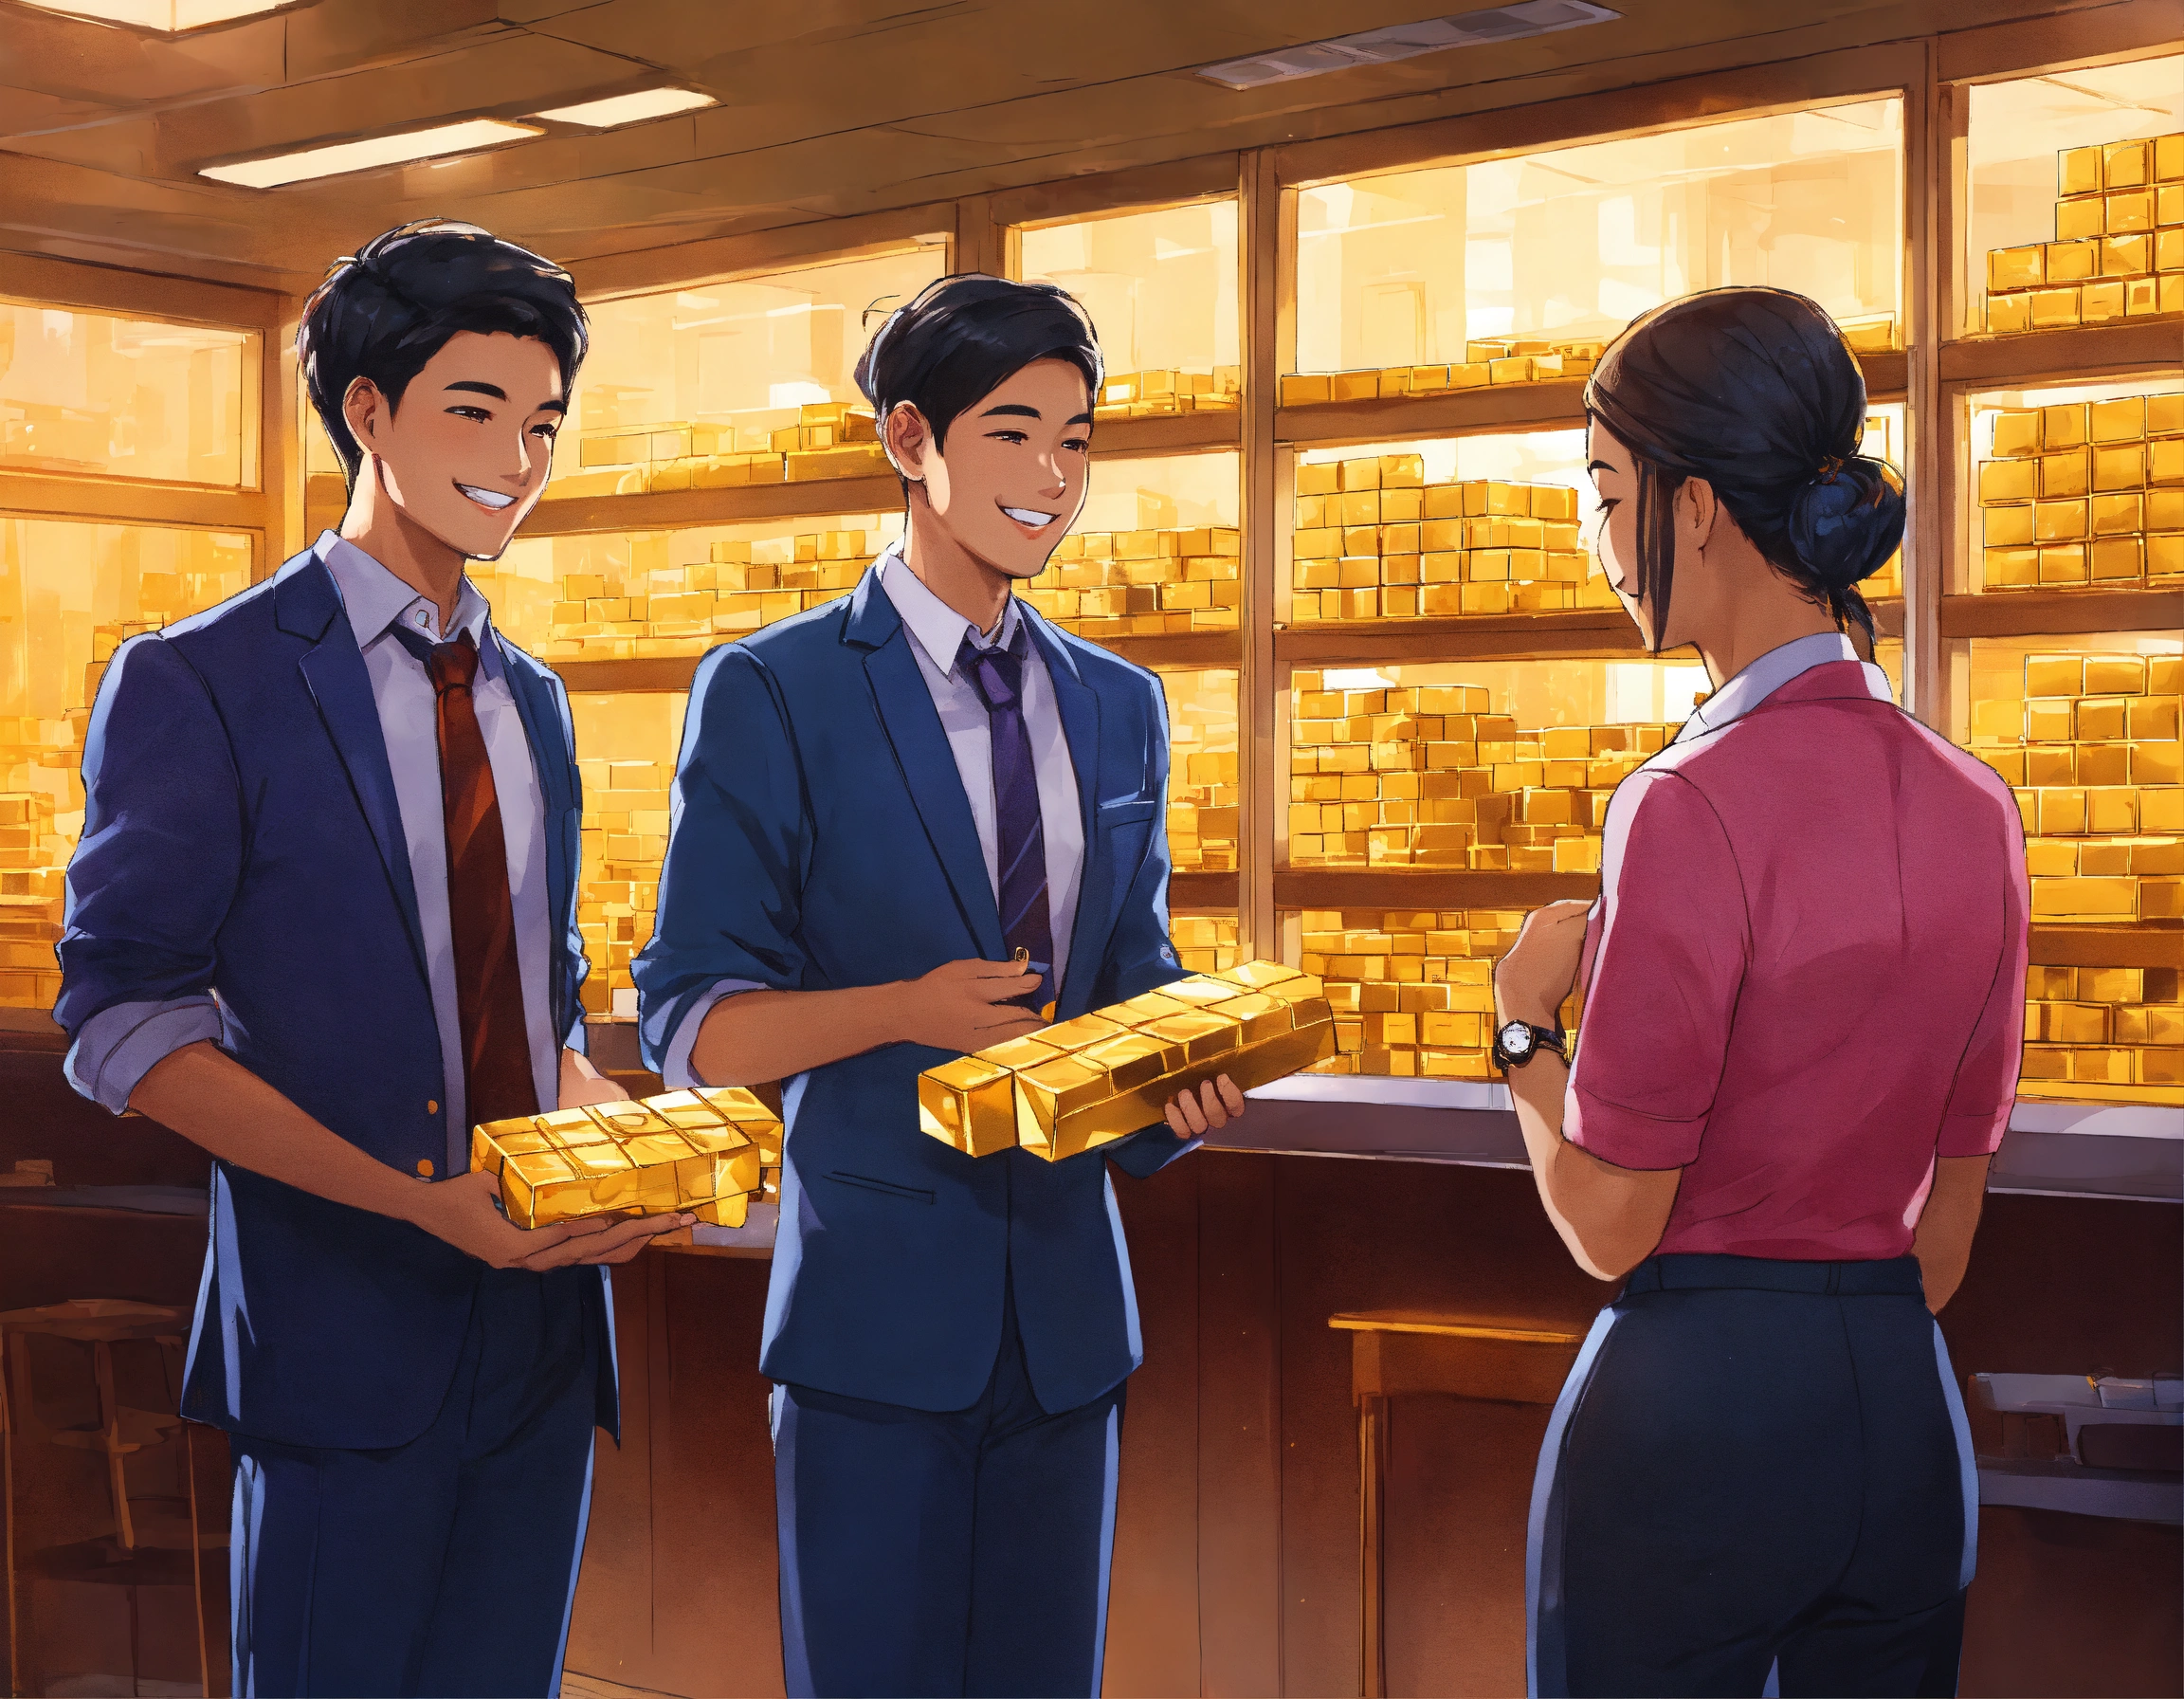 Lexica - Young people in office uniforms, focused holding gold bars ...